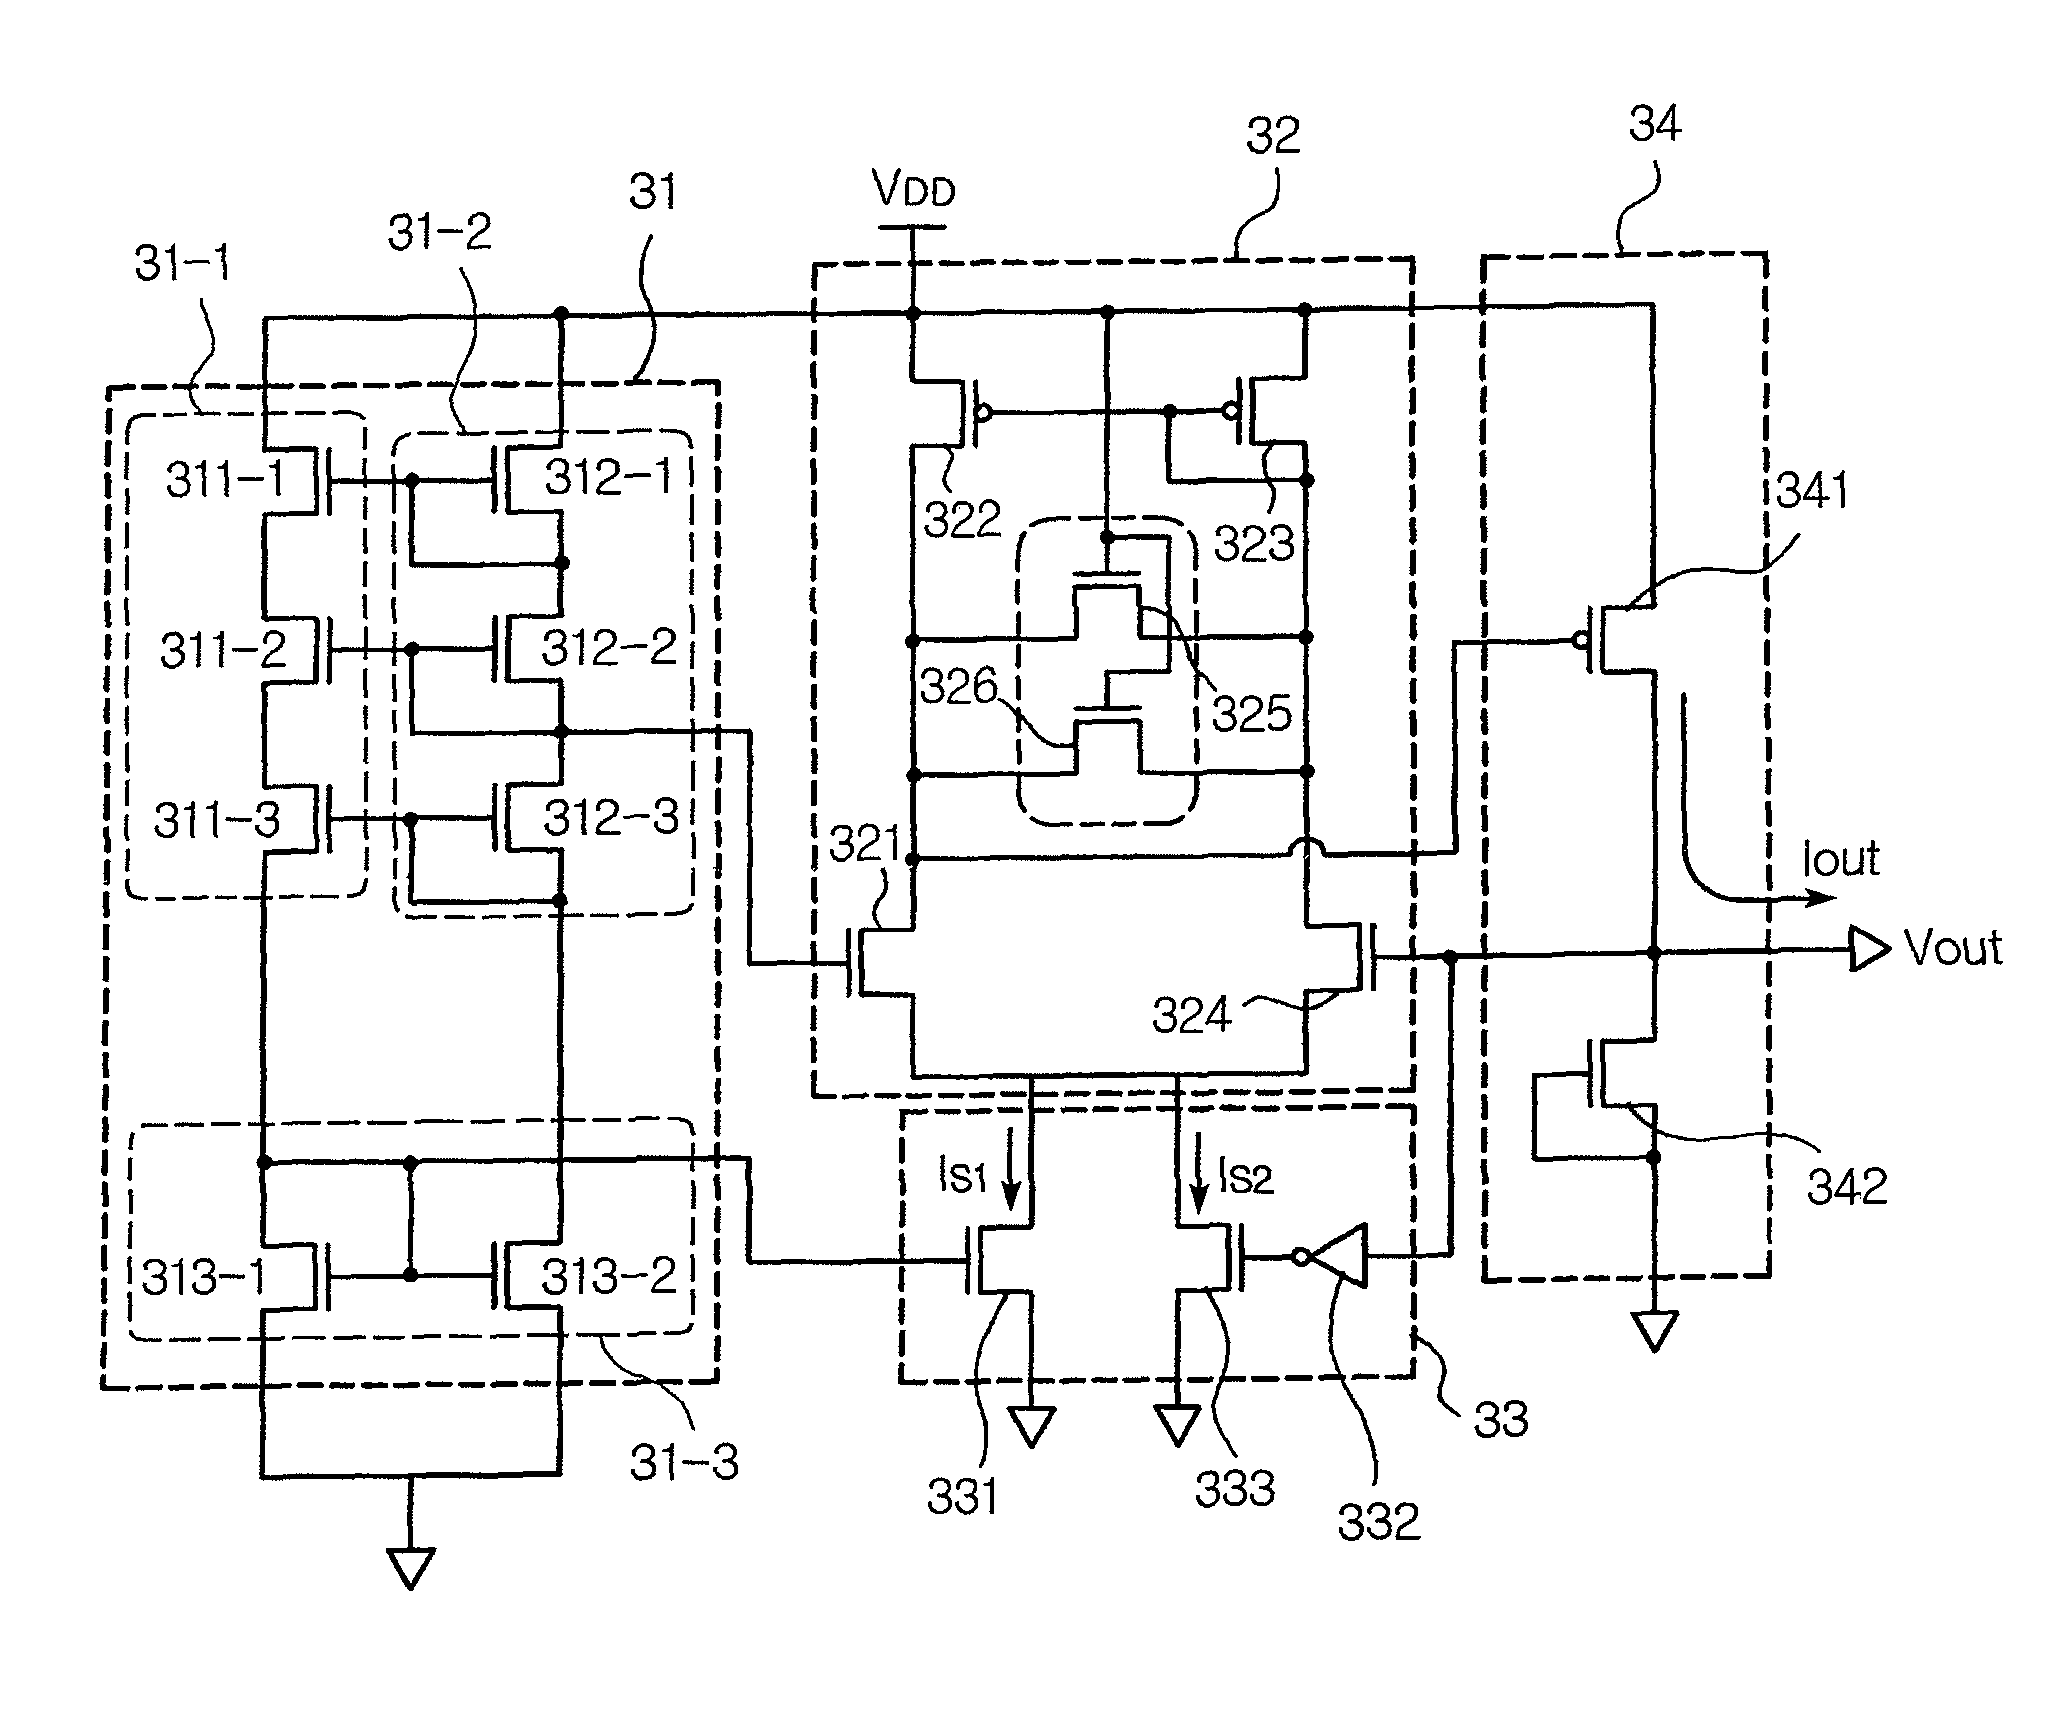 Voltage regulating apparatus having a reduced current consumption and settling time